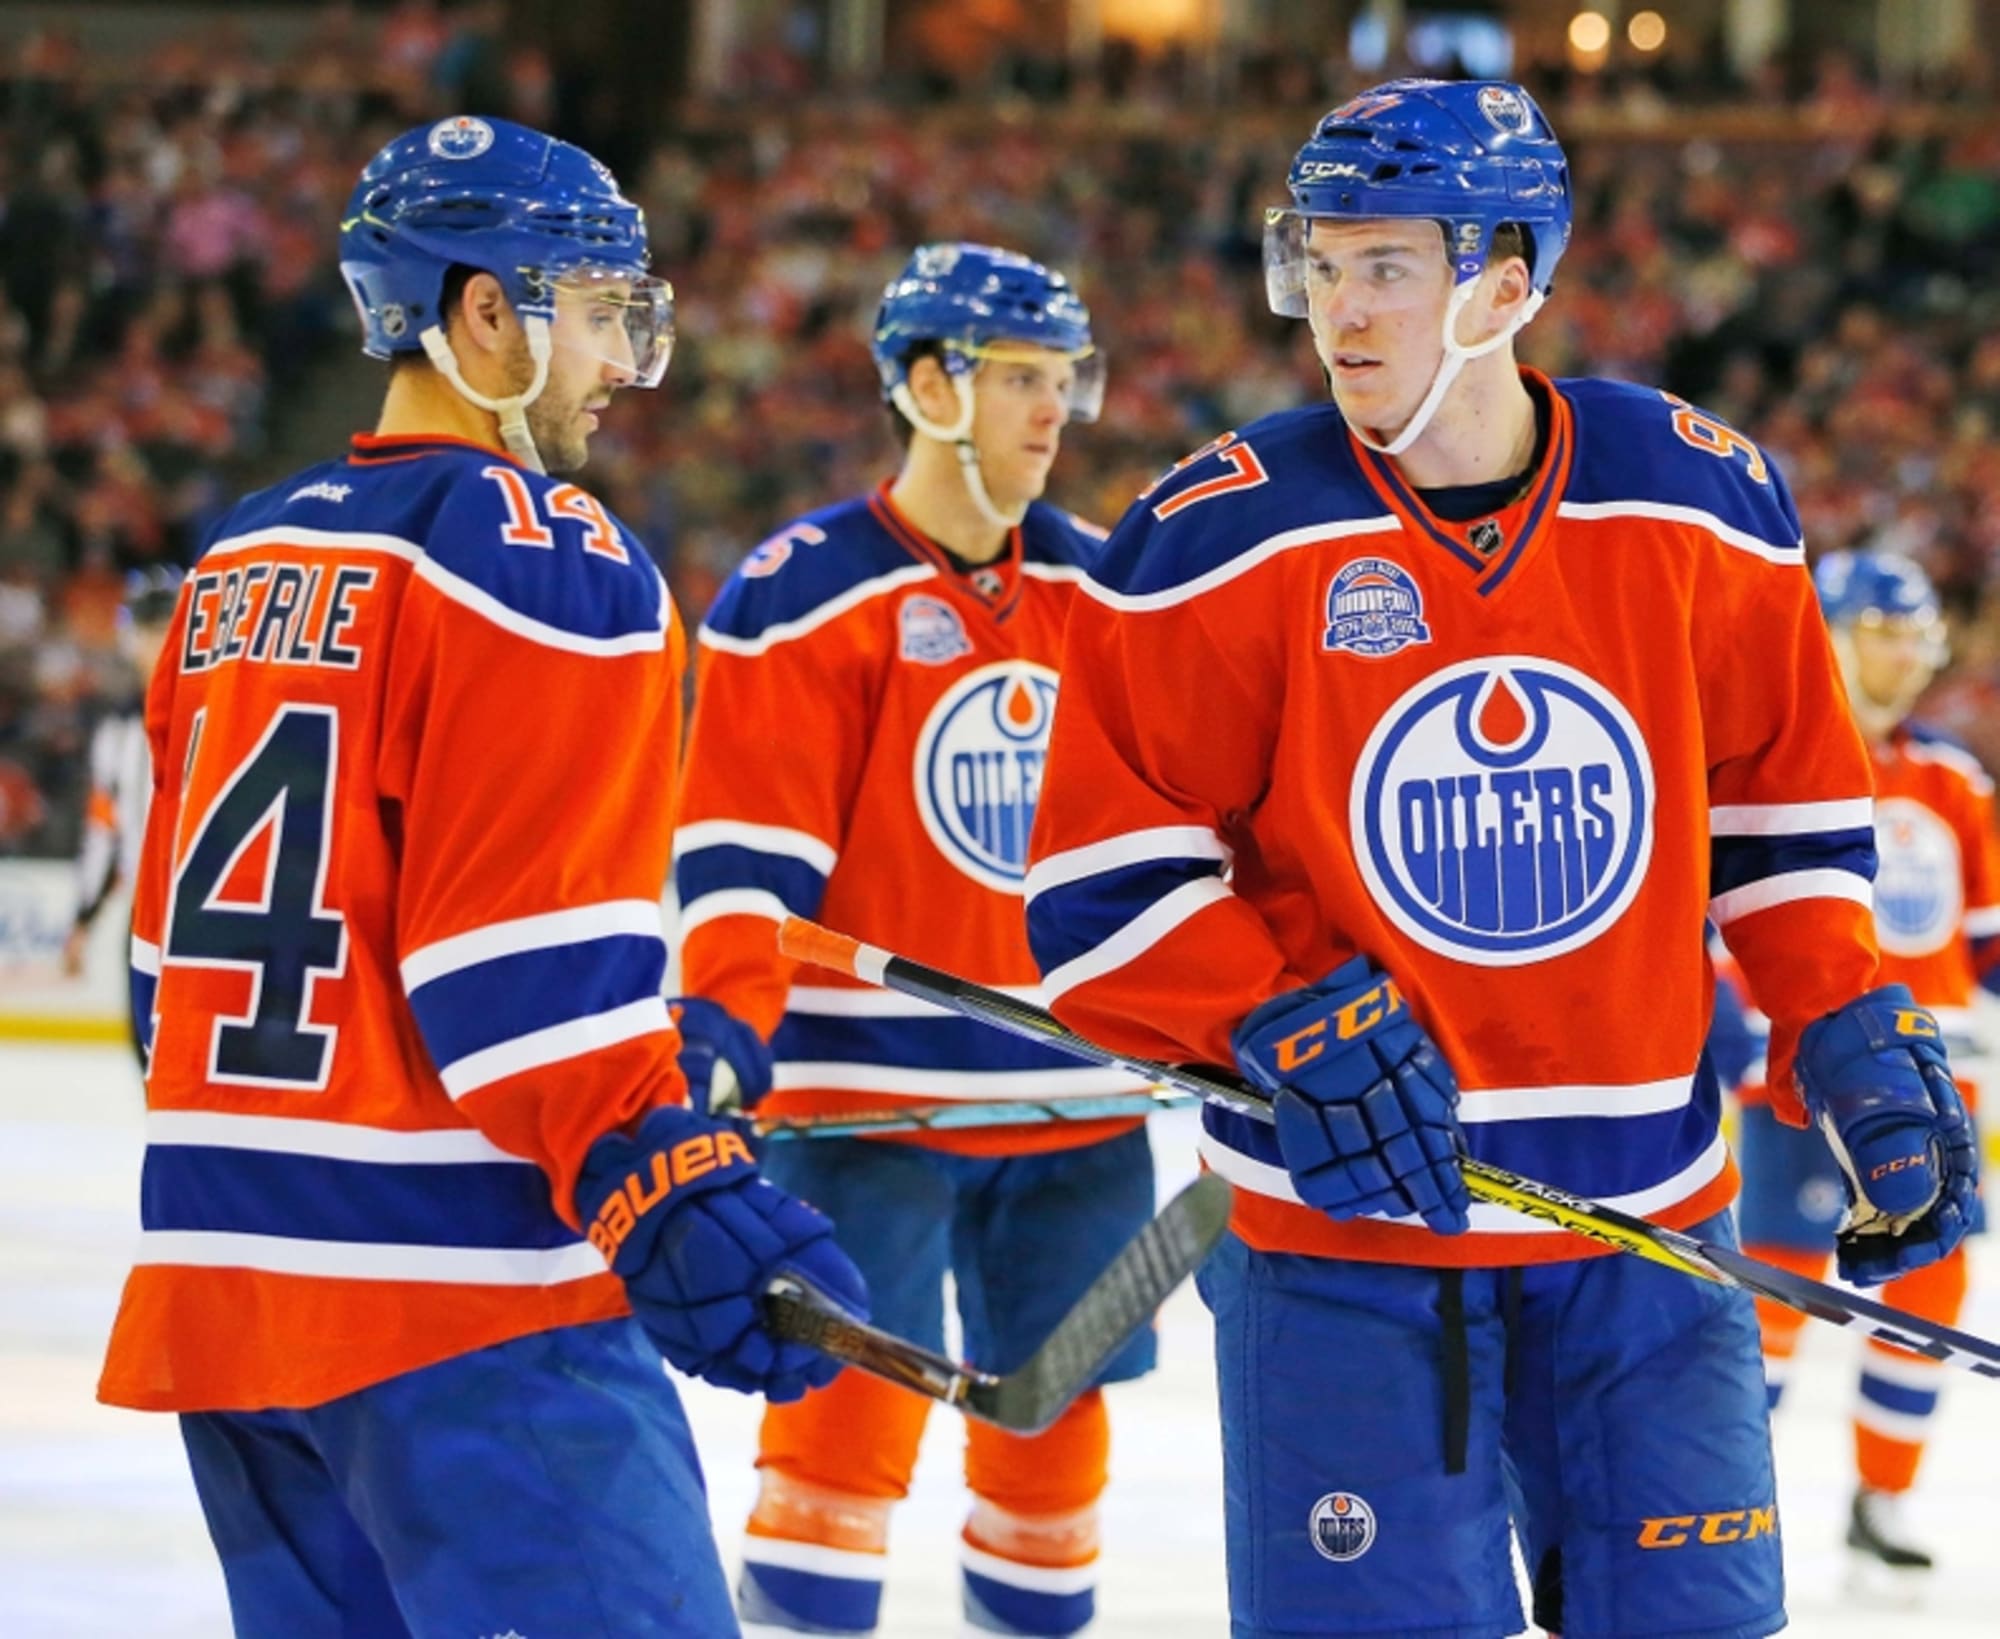 Top pick Connor McDavid skates with Oilers teammate Taylor Hall for 1st time